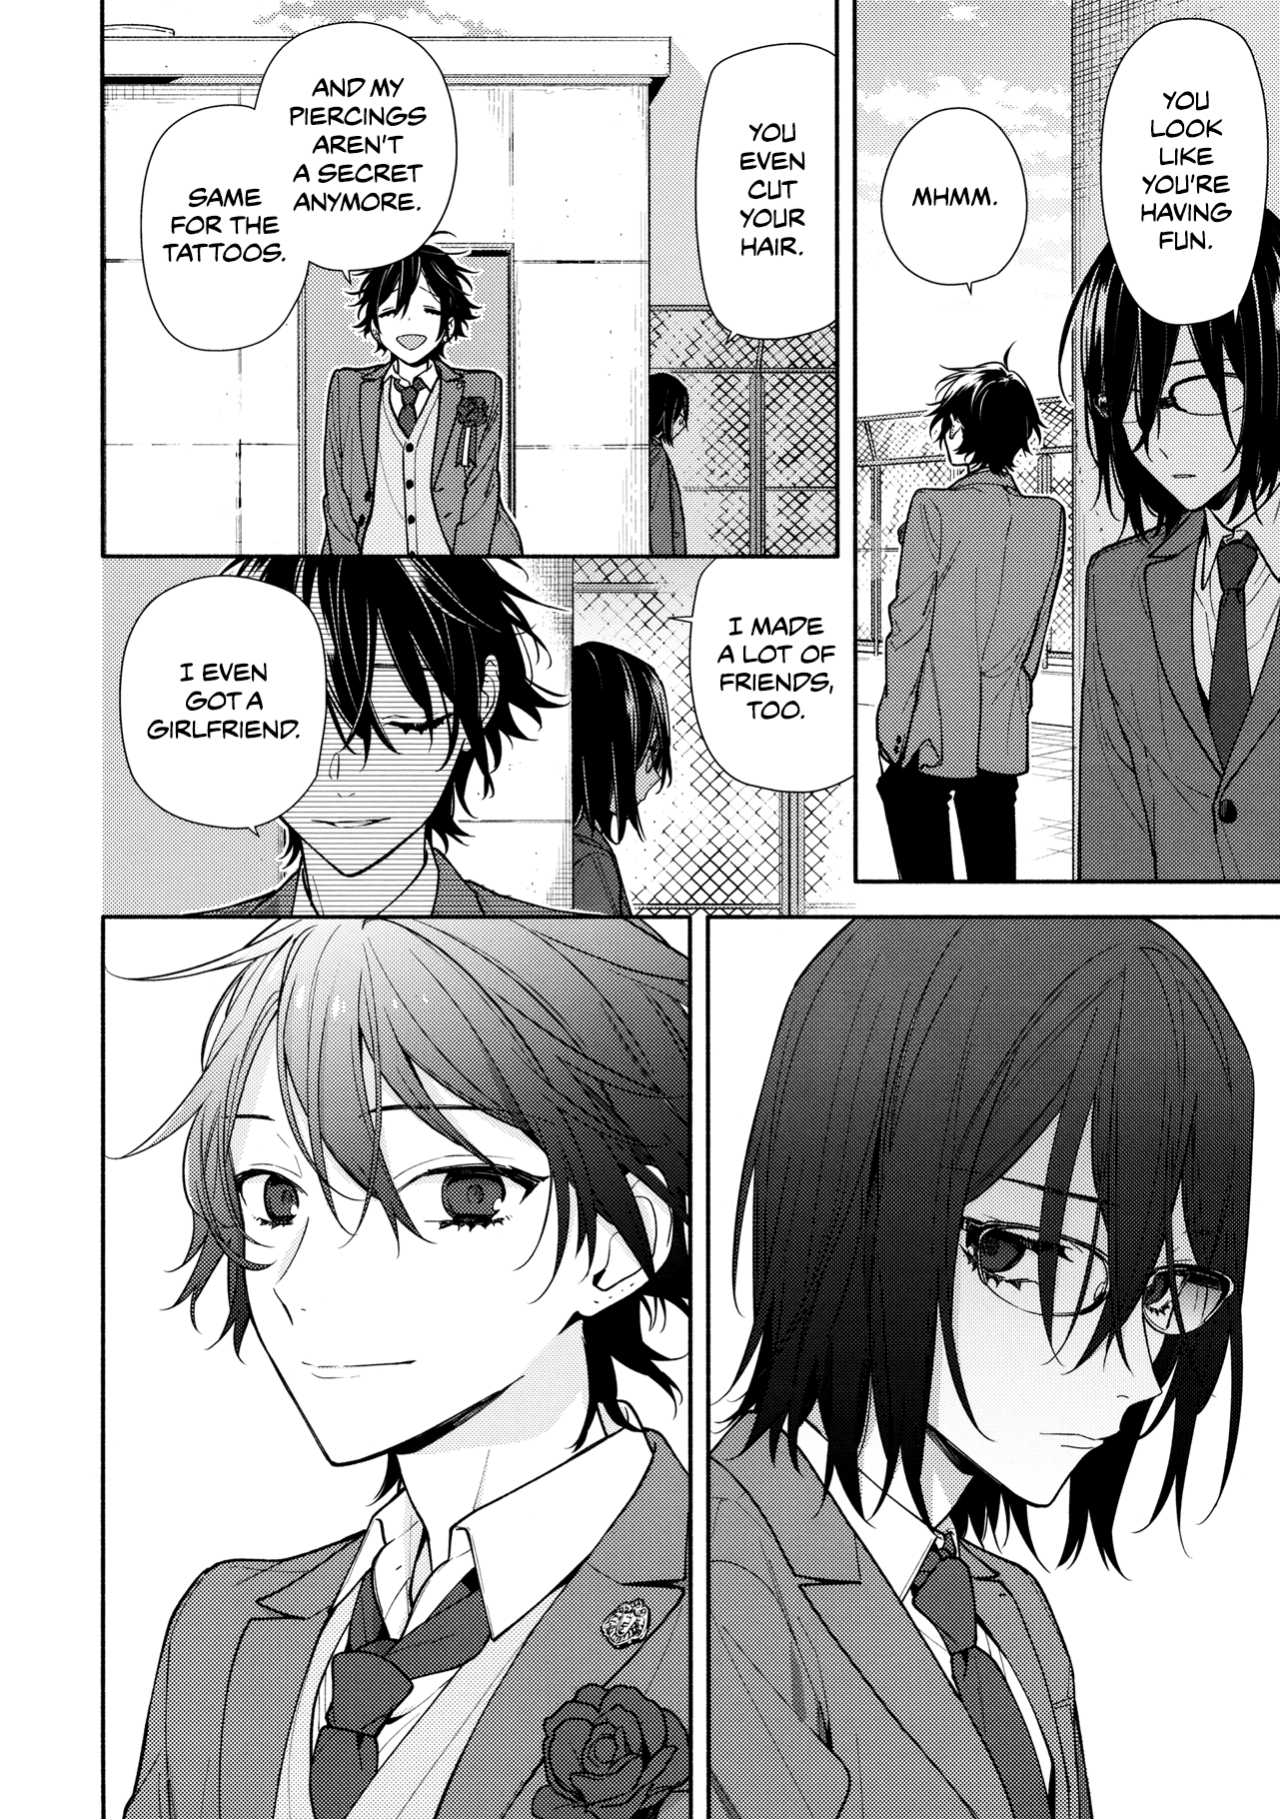 Horimiya's Finale Leaves a Lot of Unanswered Questions